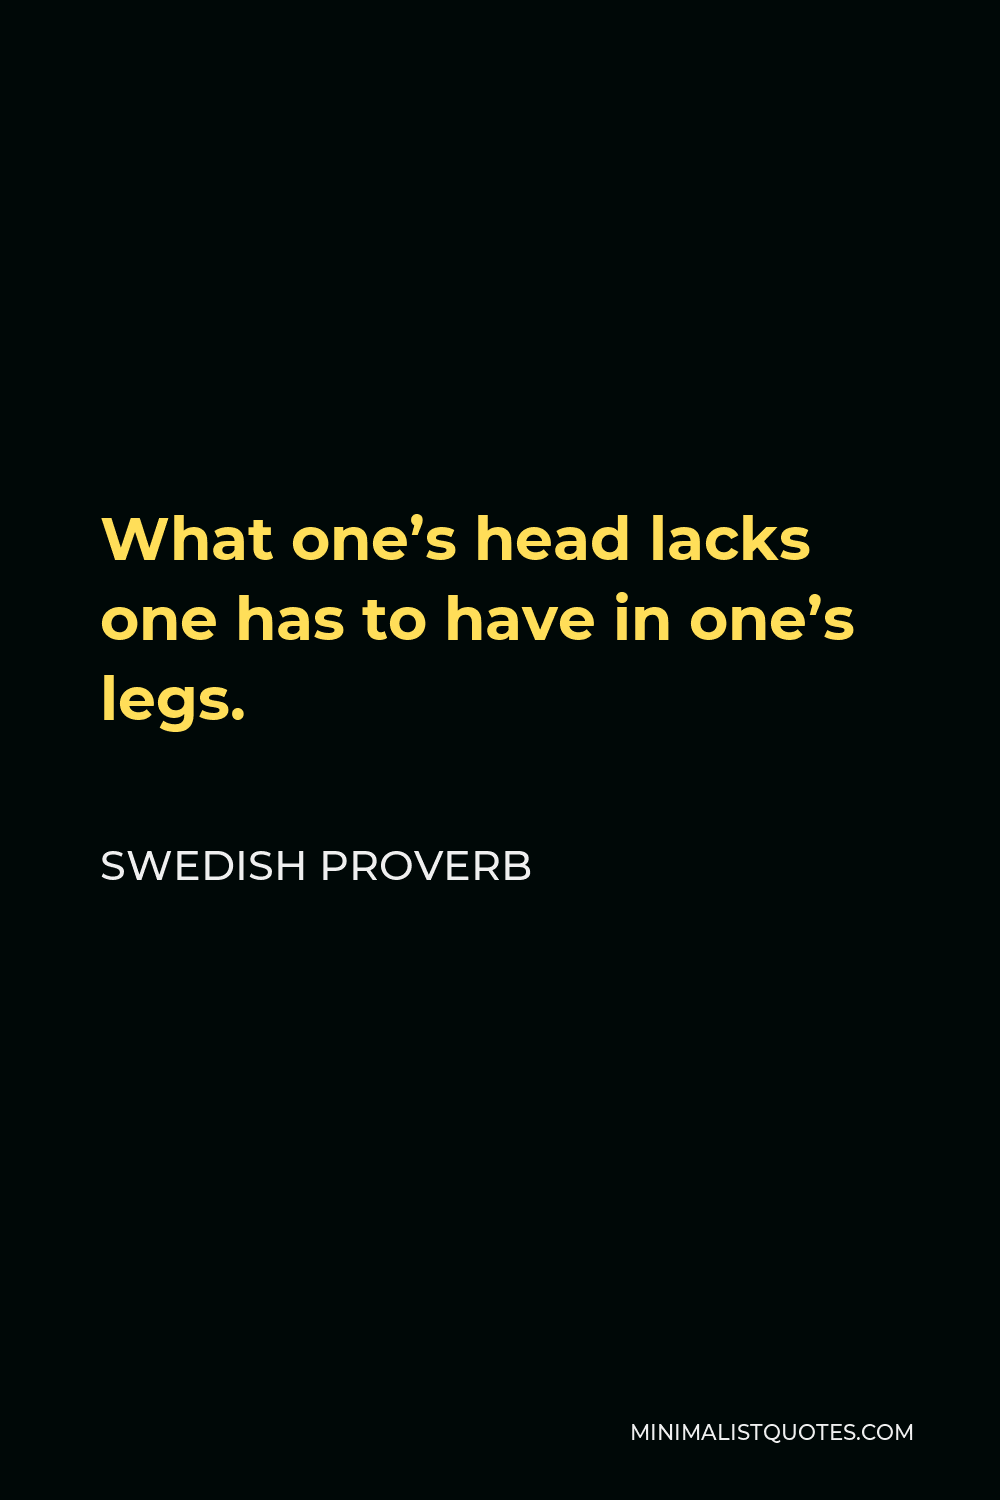 Swedish Proverb Quote - What one’s head lacks one has to have in one’s legs.